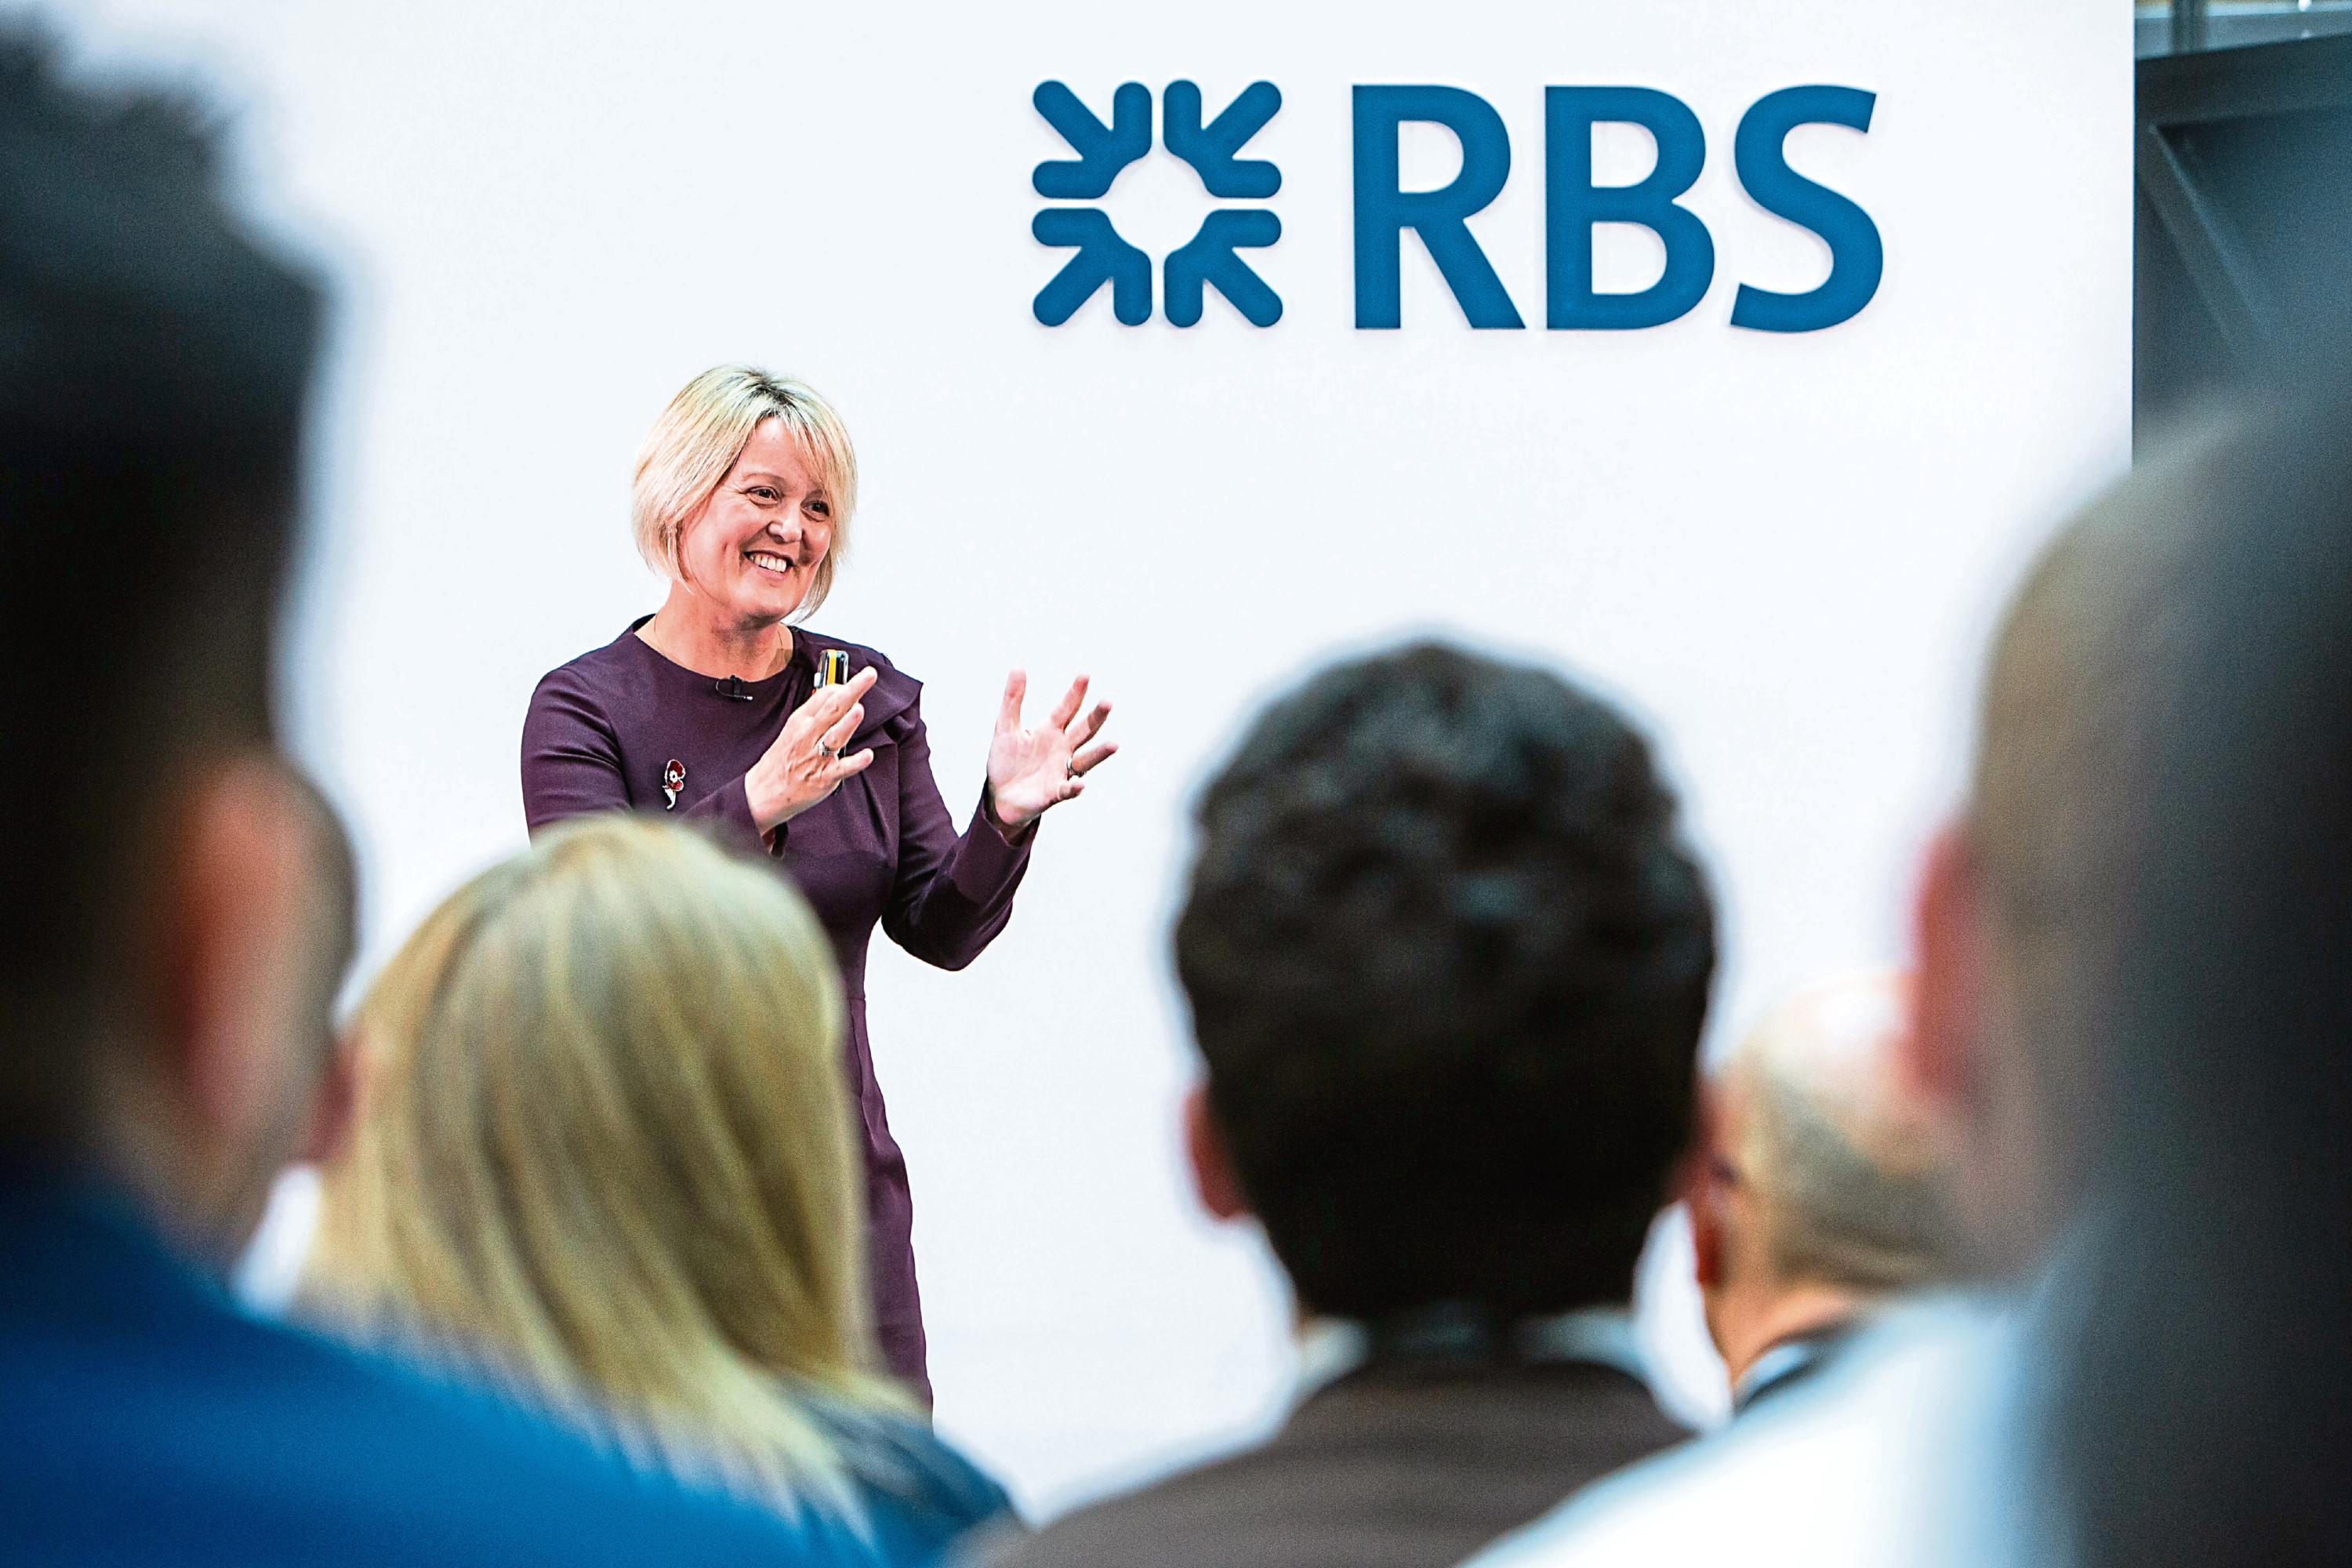 Royal Bank of Scotland chief executive Alison Rose

Handout from RBS